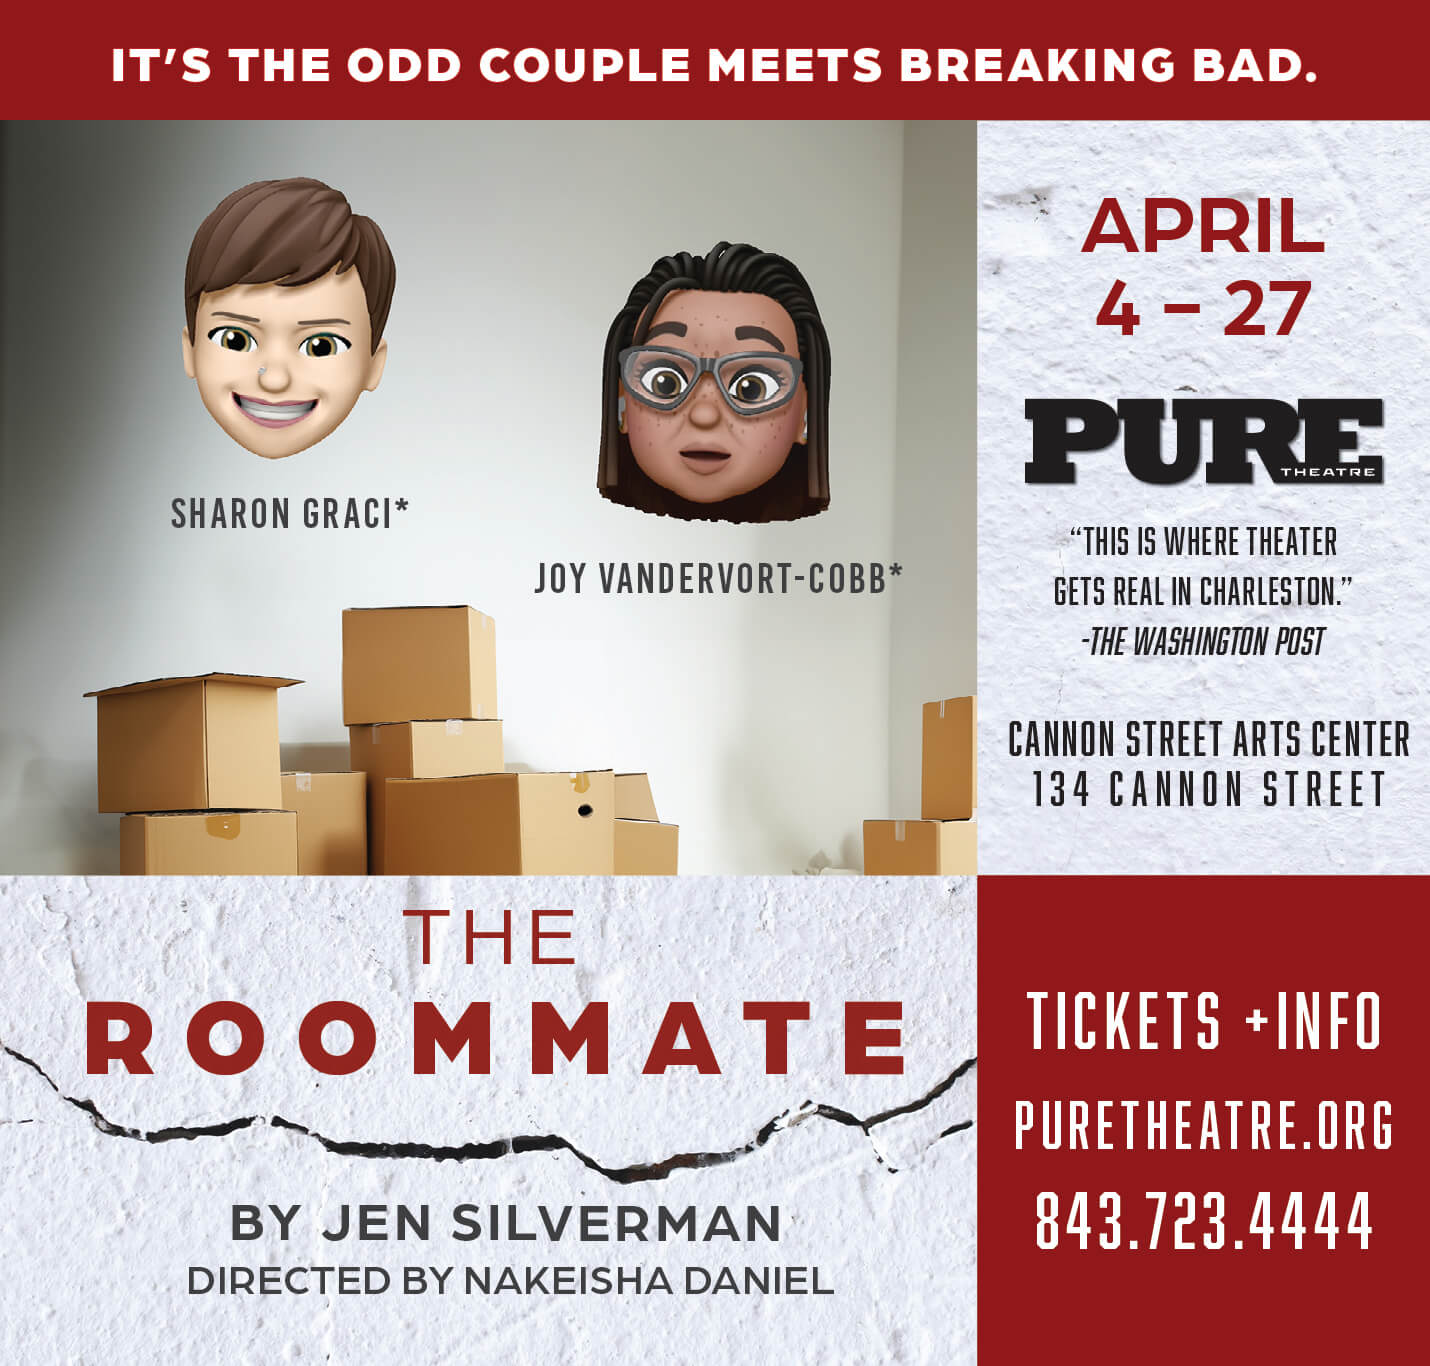 The Roommate by Jen Silverman at PURE Theatre - April 2024 - Directed by Nakeisha Daniel starring Sharon Graci and Joy Vandervort-Cobb